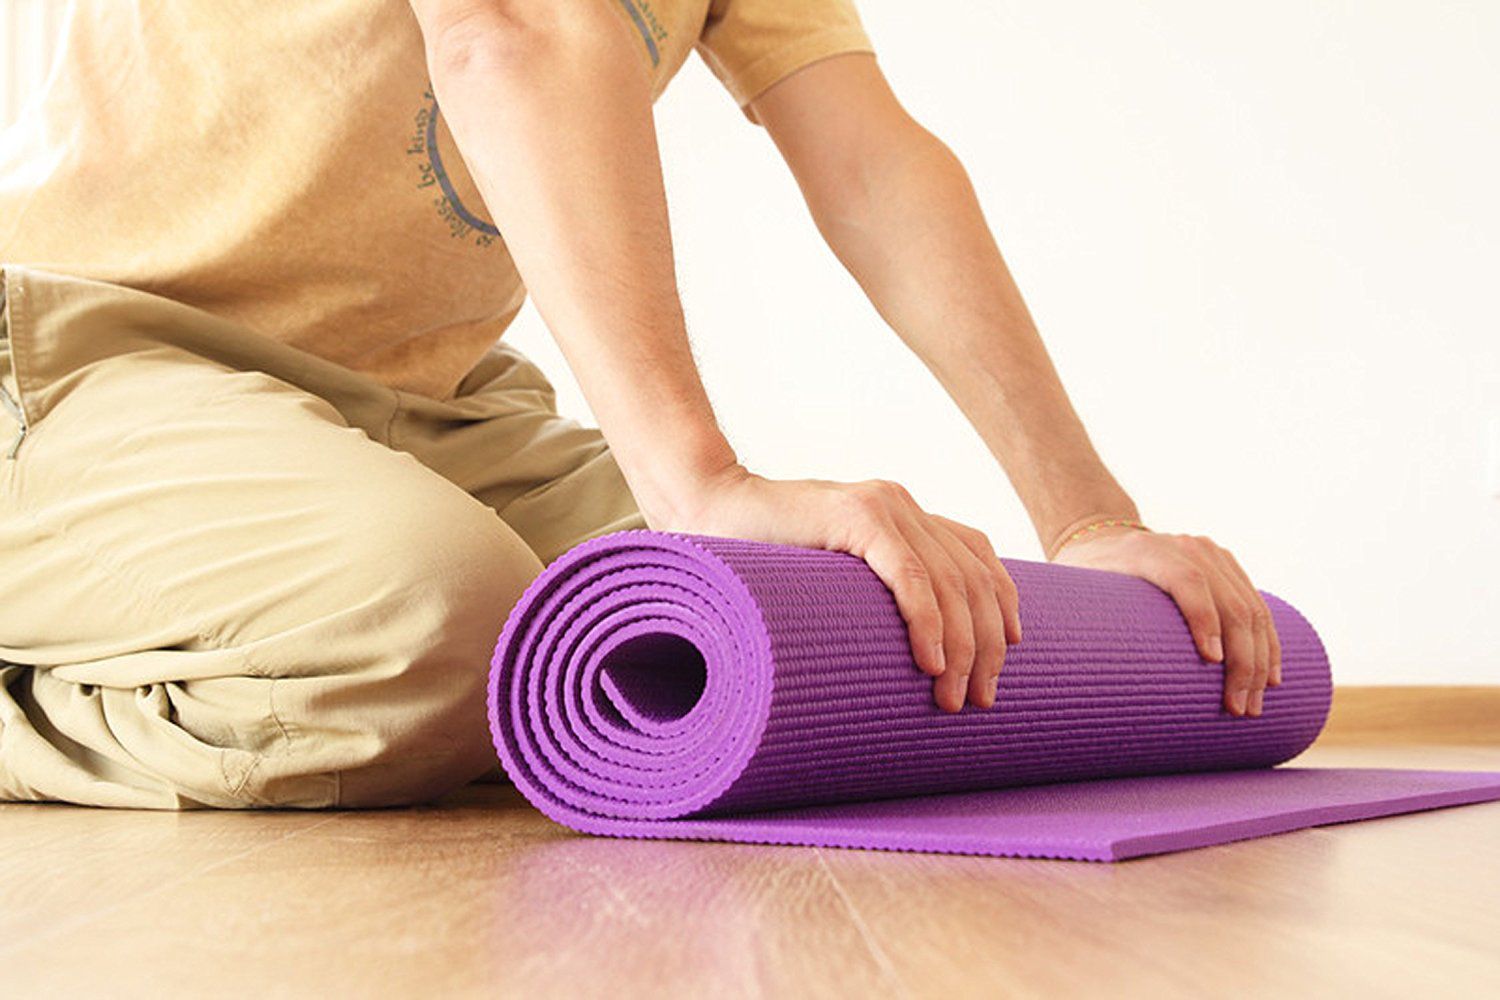 yoga mat: Buy Online at Best Price on Snapdeal